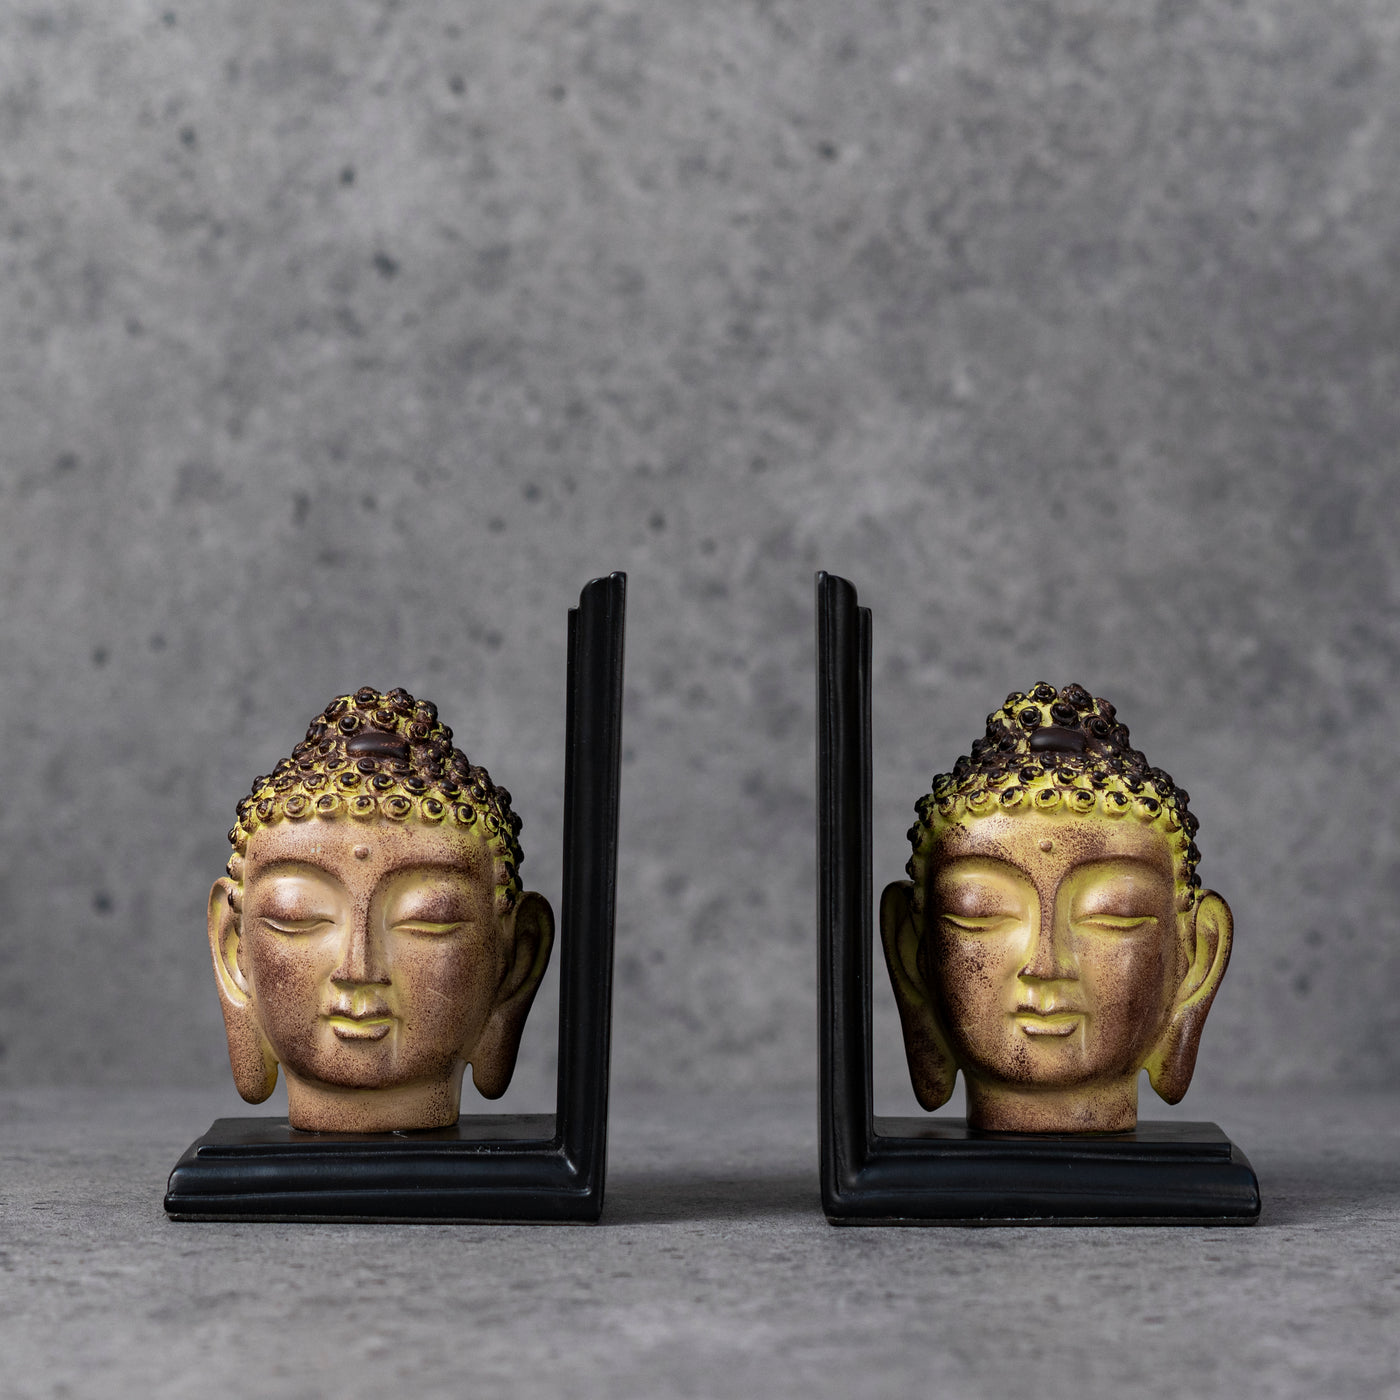 Antique buddha bookends by Home 360